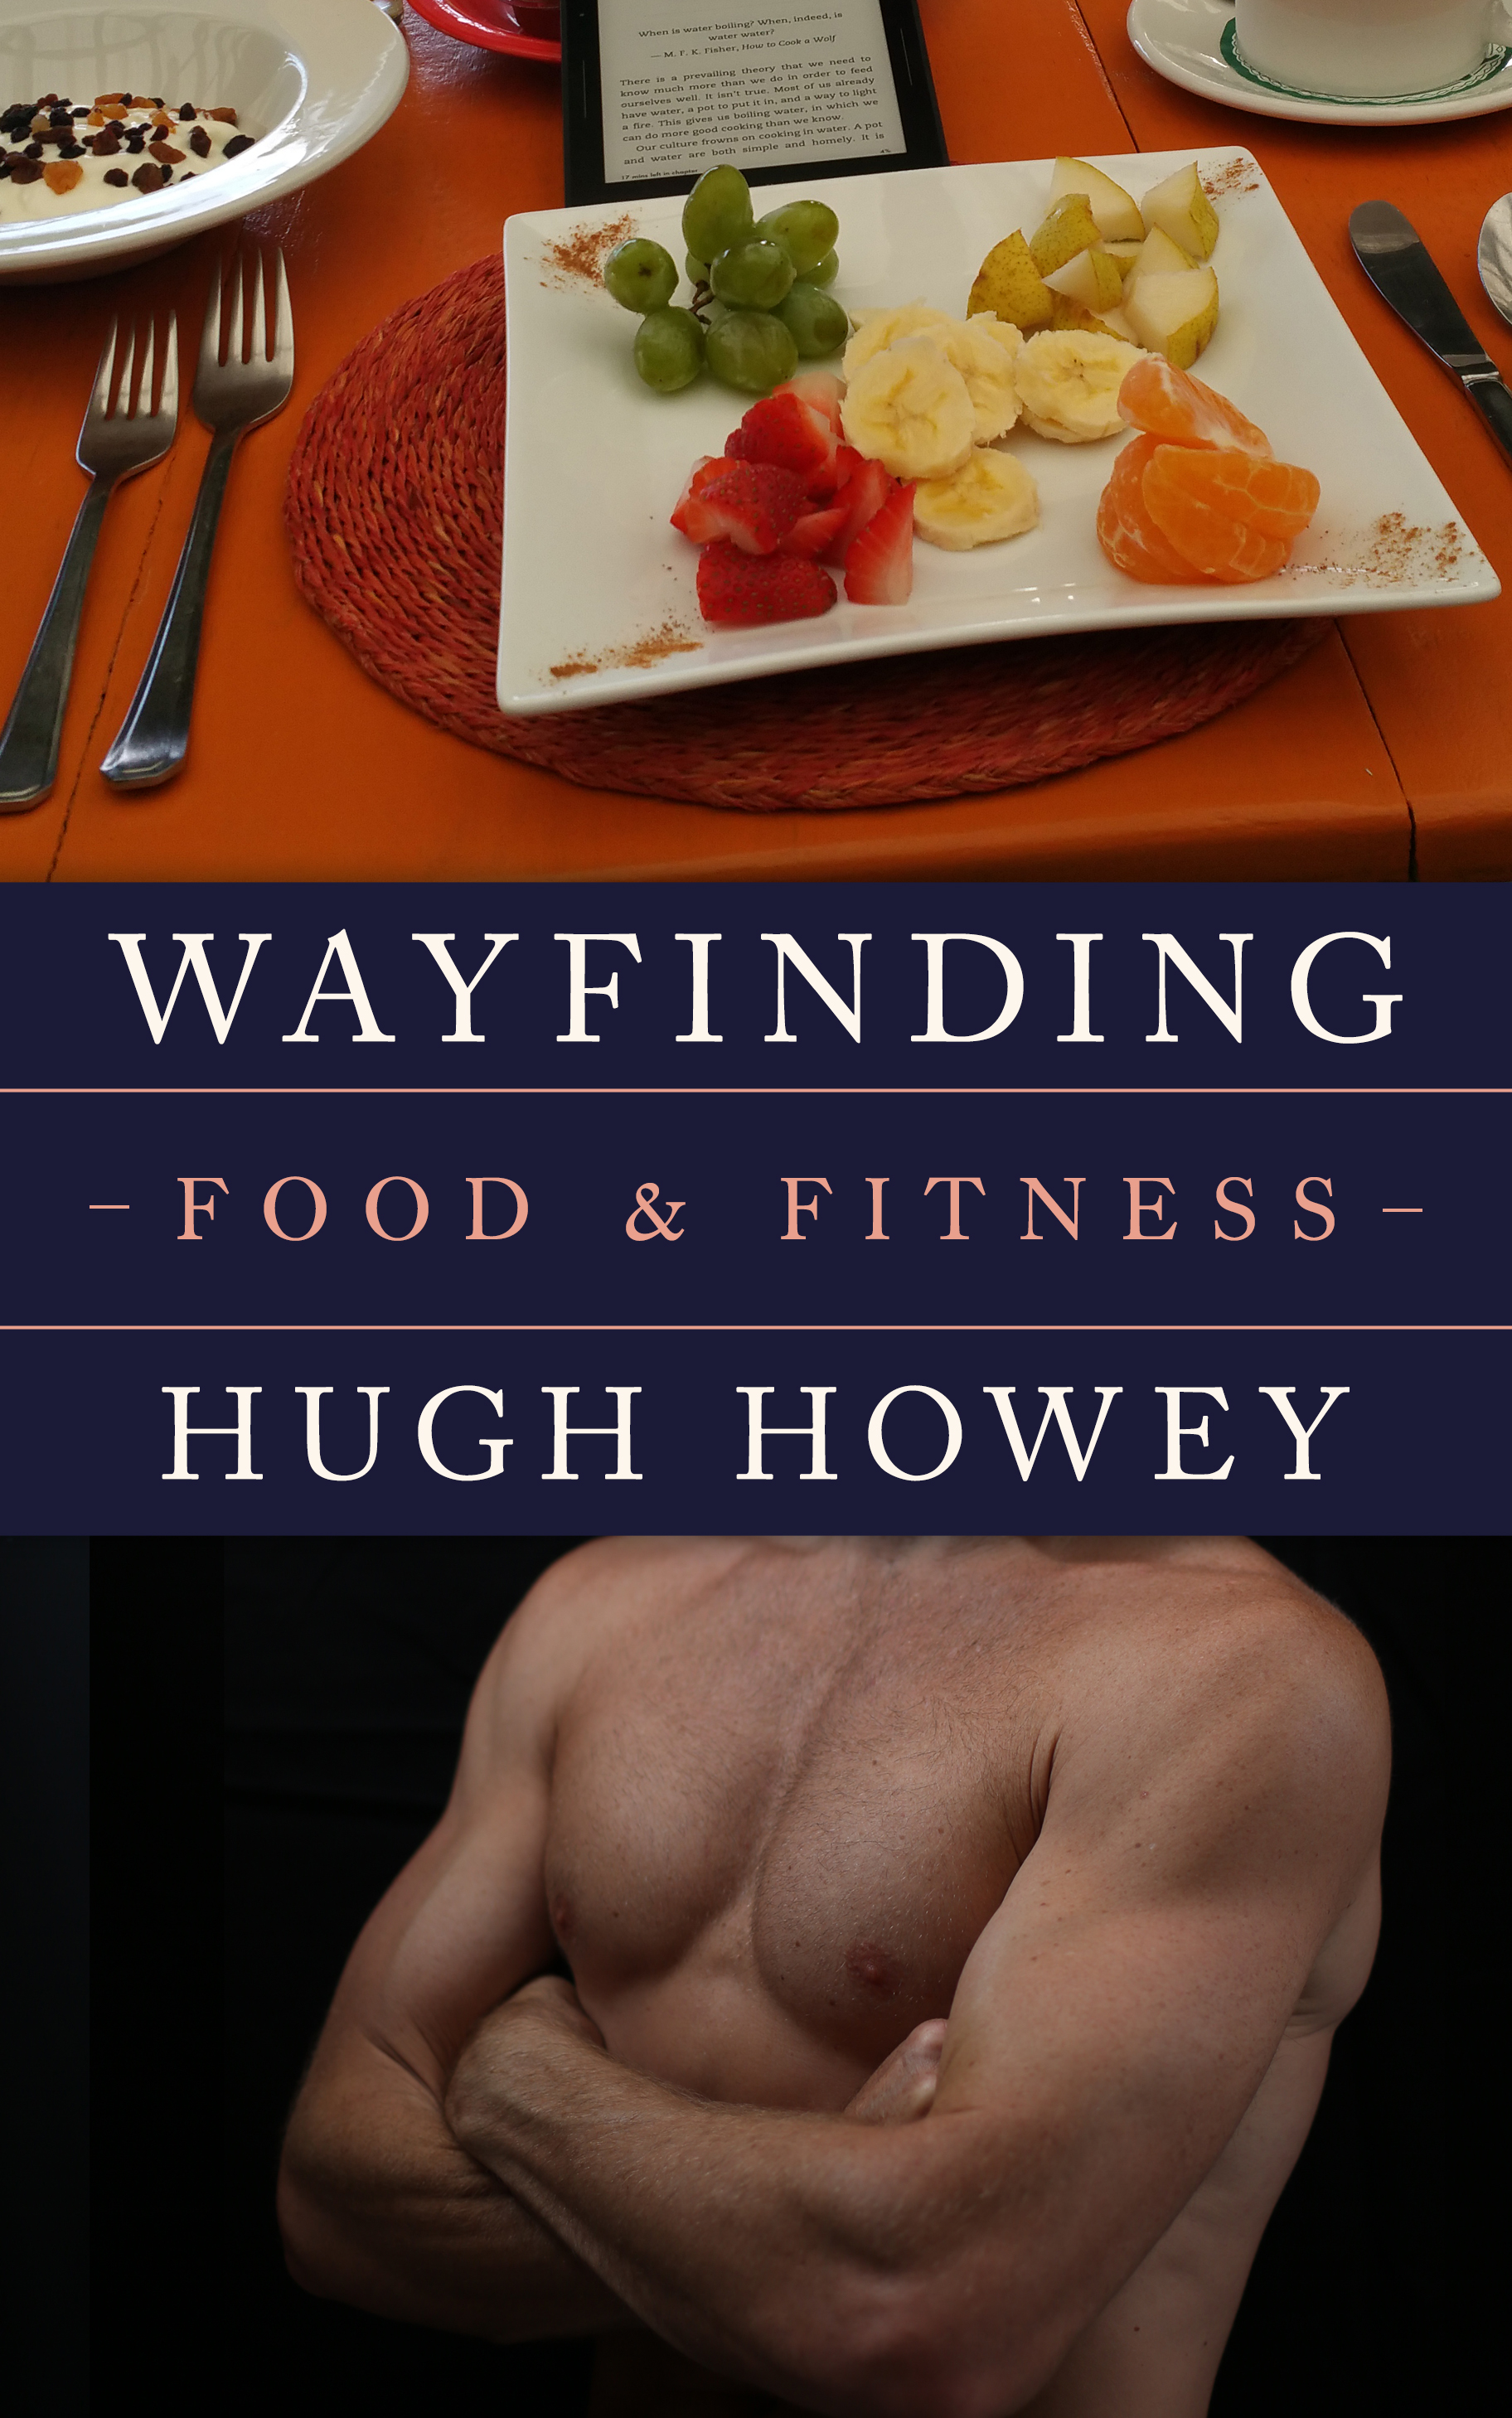 Wayfinding Special: Food and Fitness